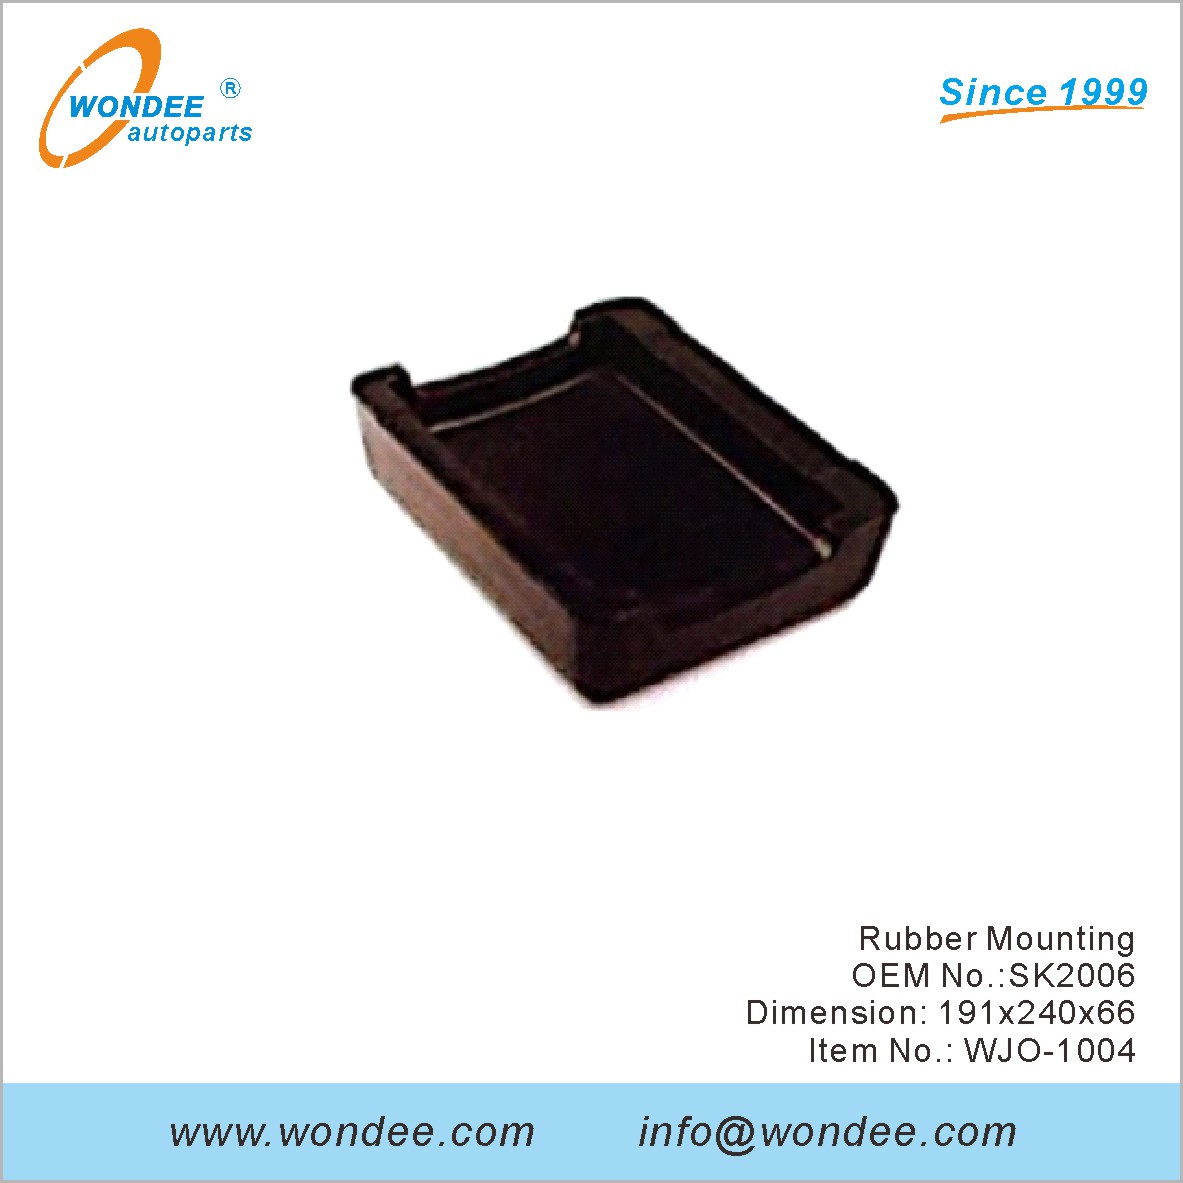 Rubber Mounting OEM SK2006 for JOST from WONDEE